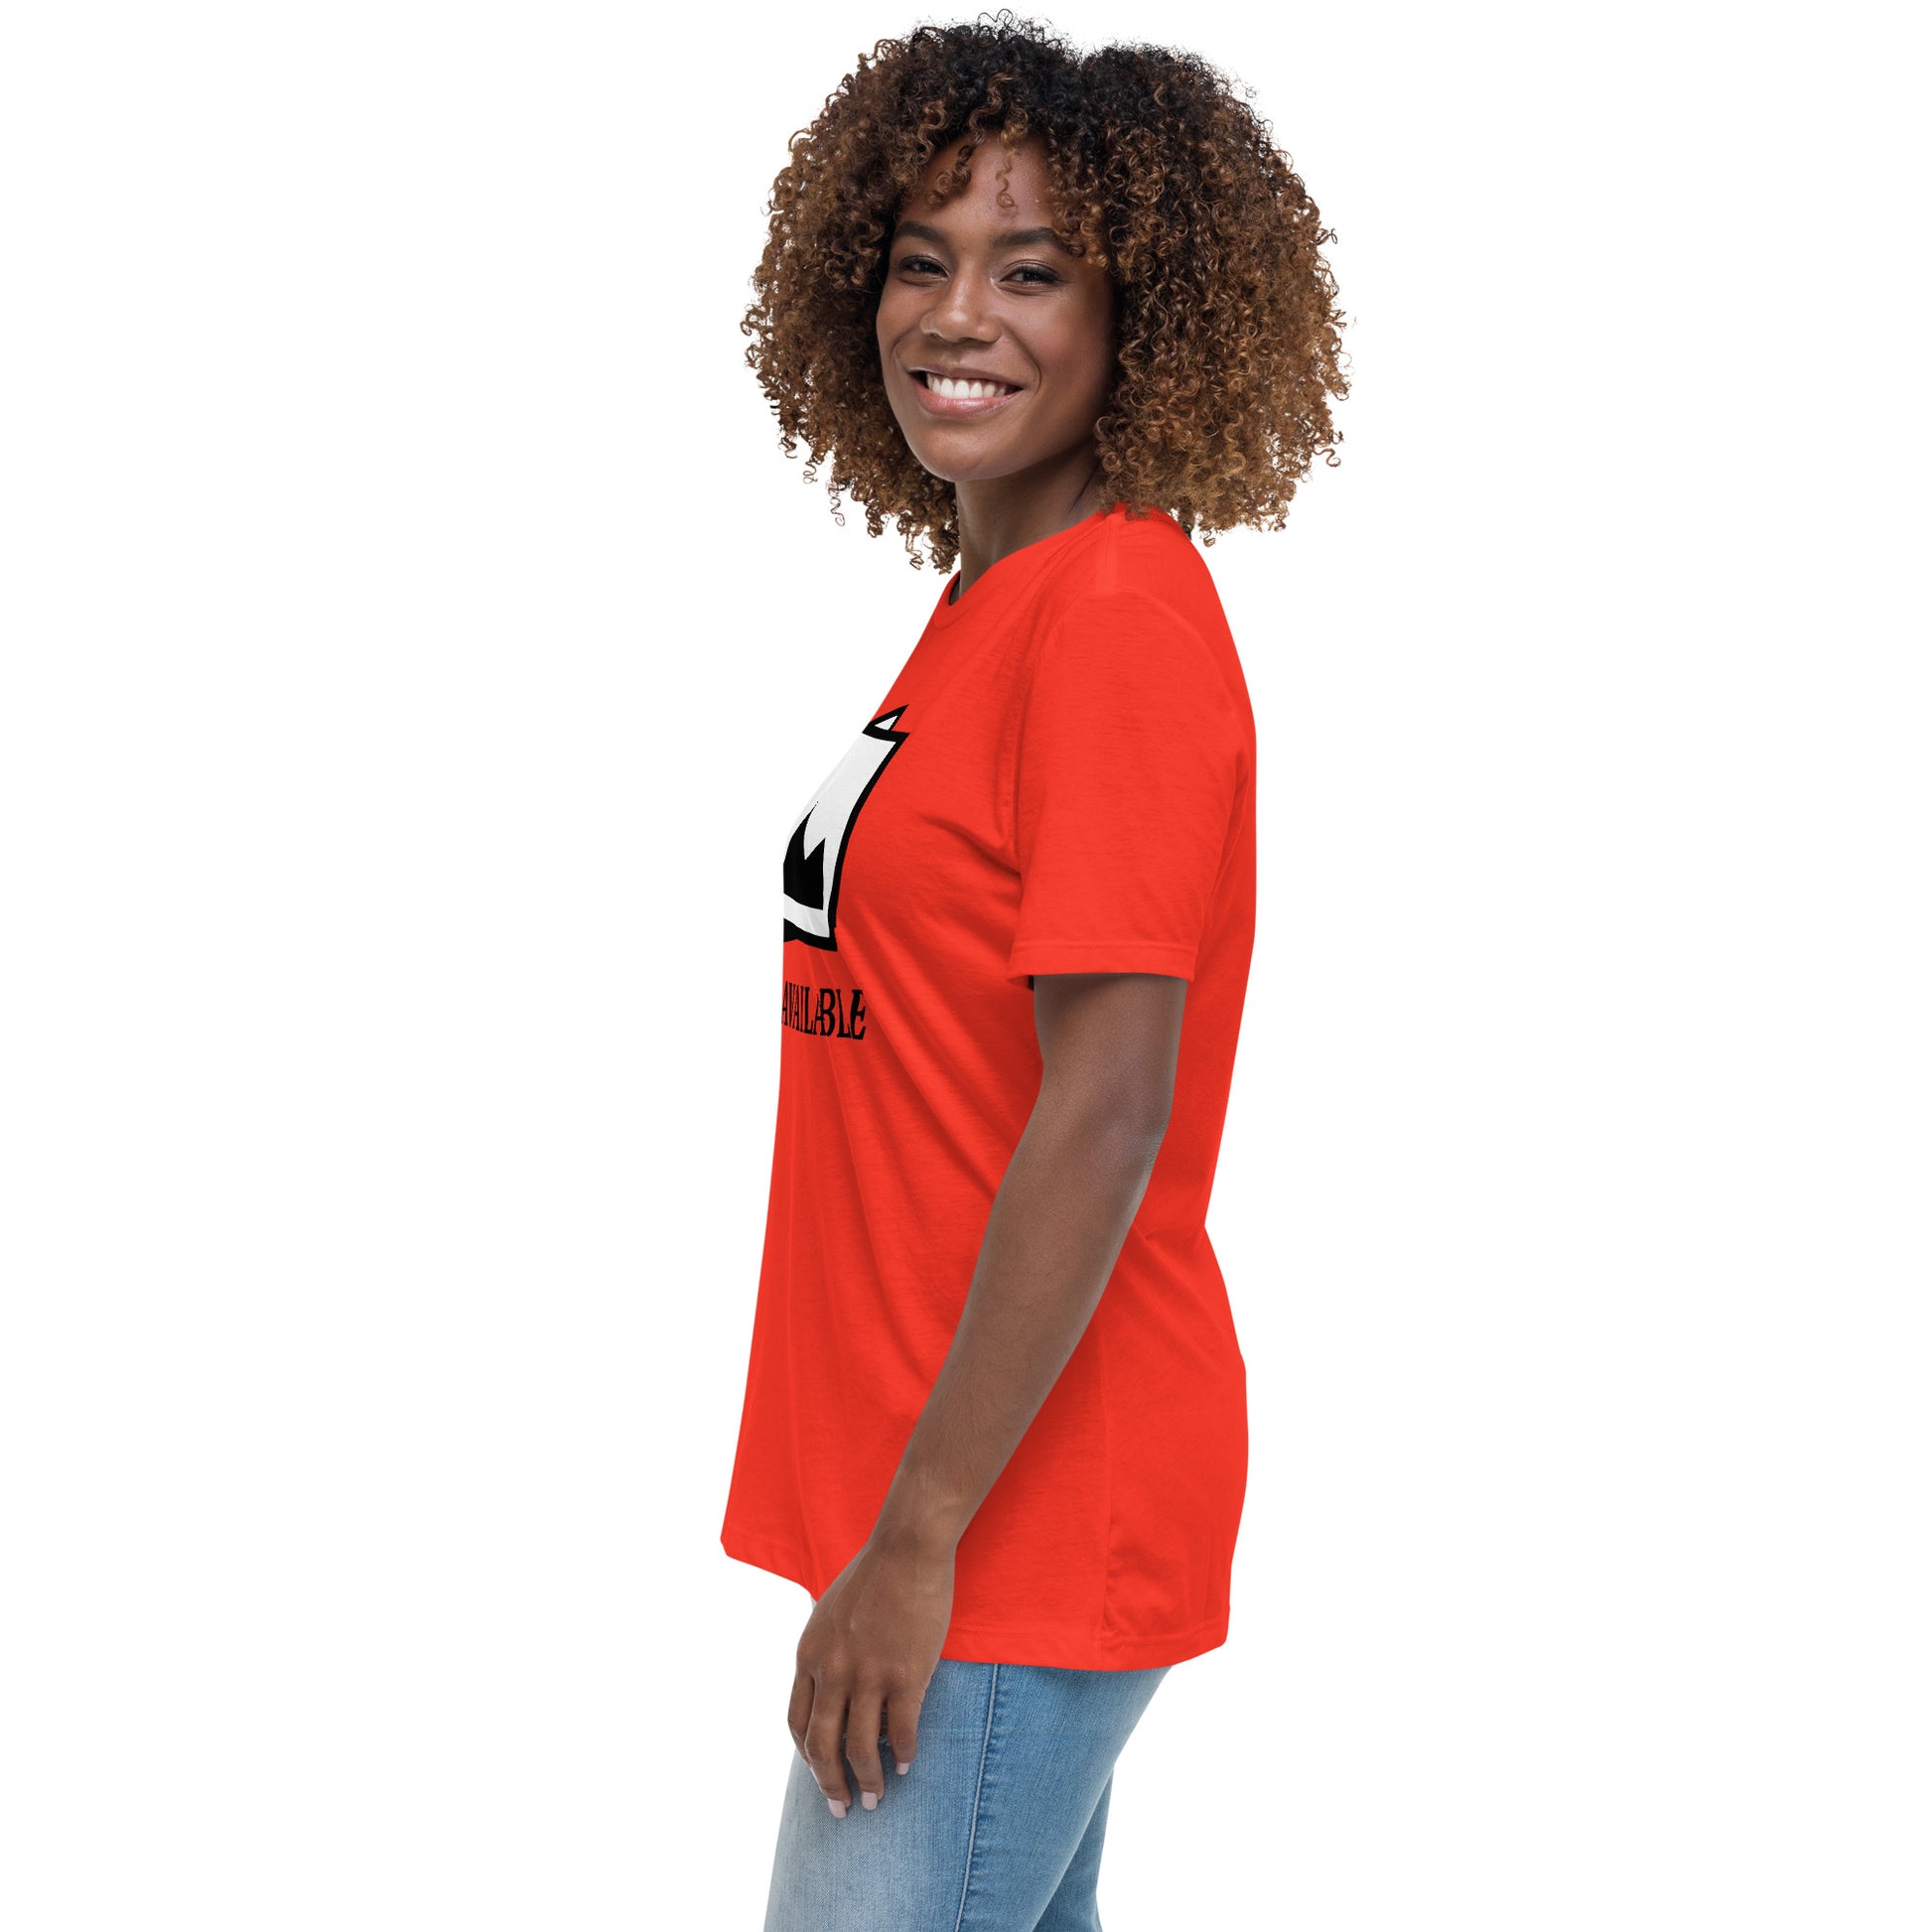 Women with poppy t-shirt with image and text "no image available"